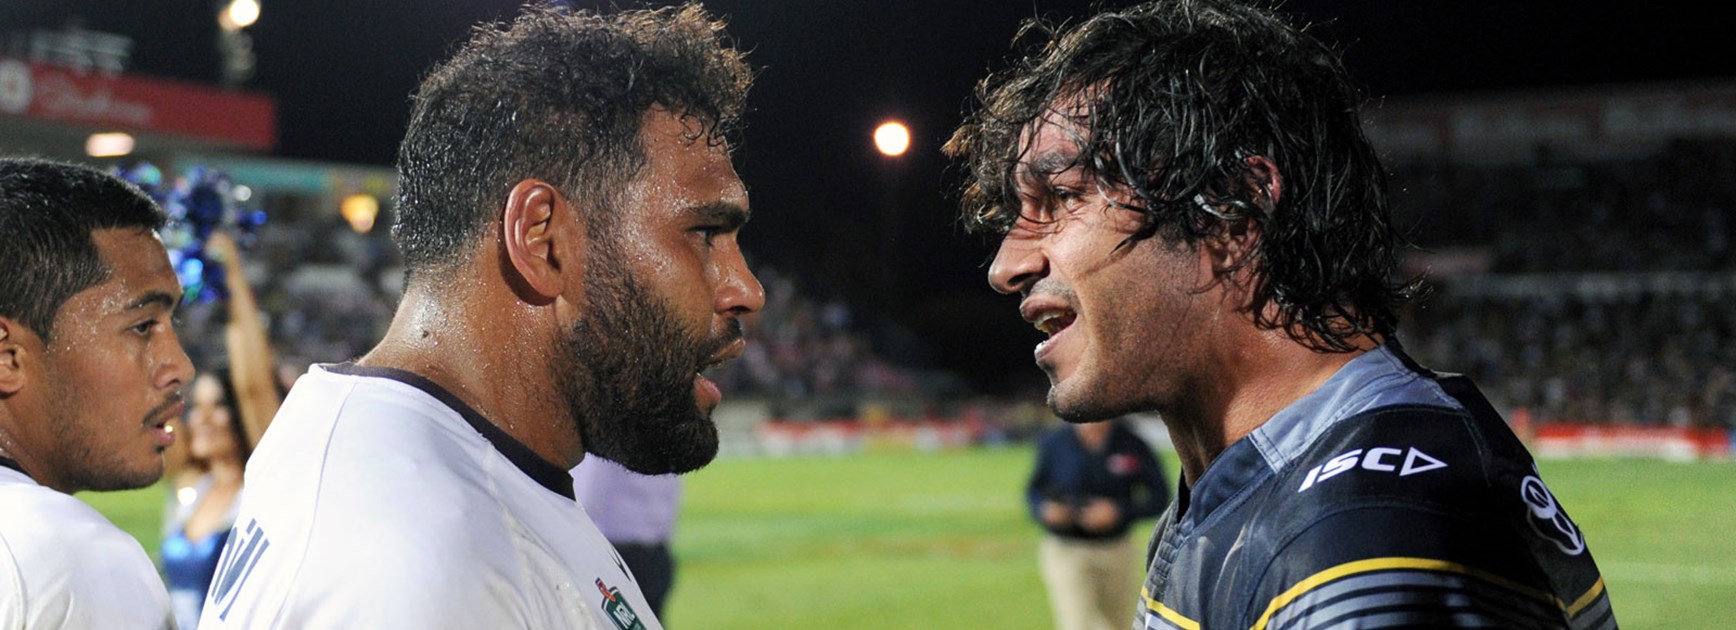 Sam Thaiday and Johnathan Thurston are two of the mainstays of the Broncos-Cowboys rivalry.